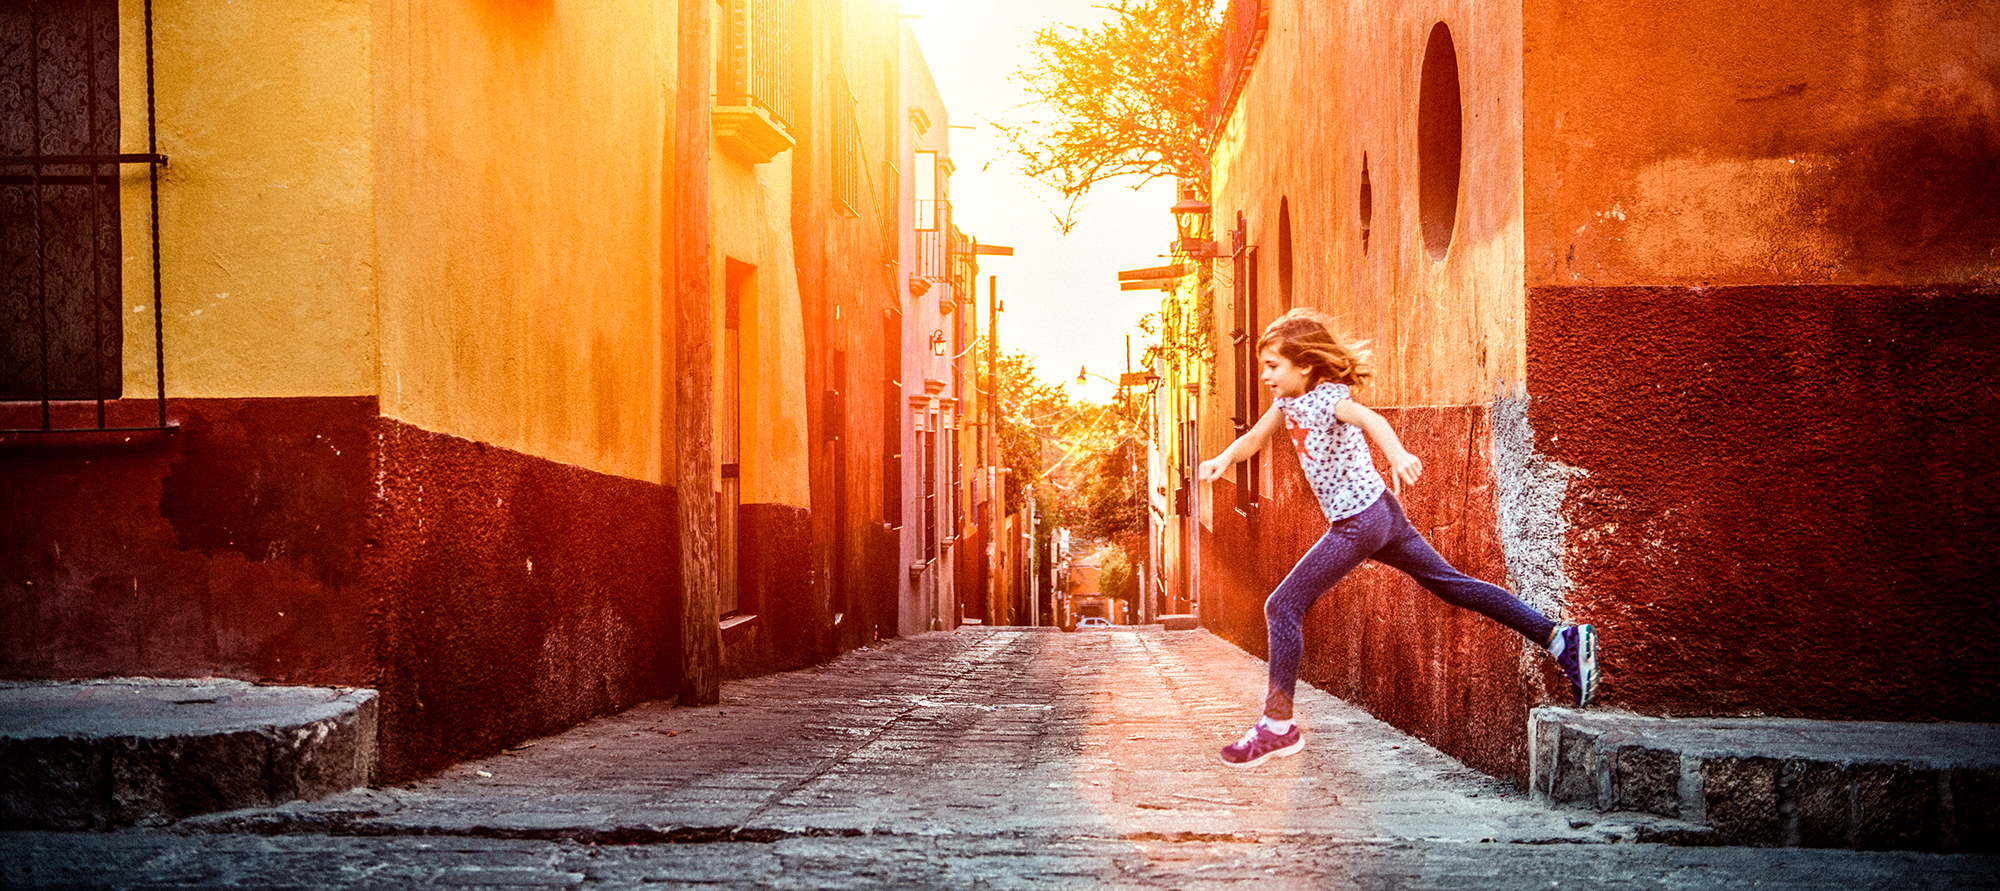  Young girl leaping across a street in Mexico.